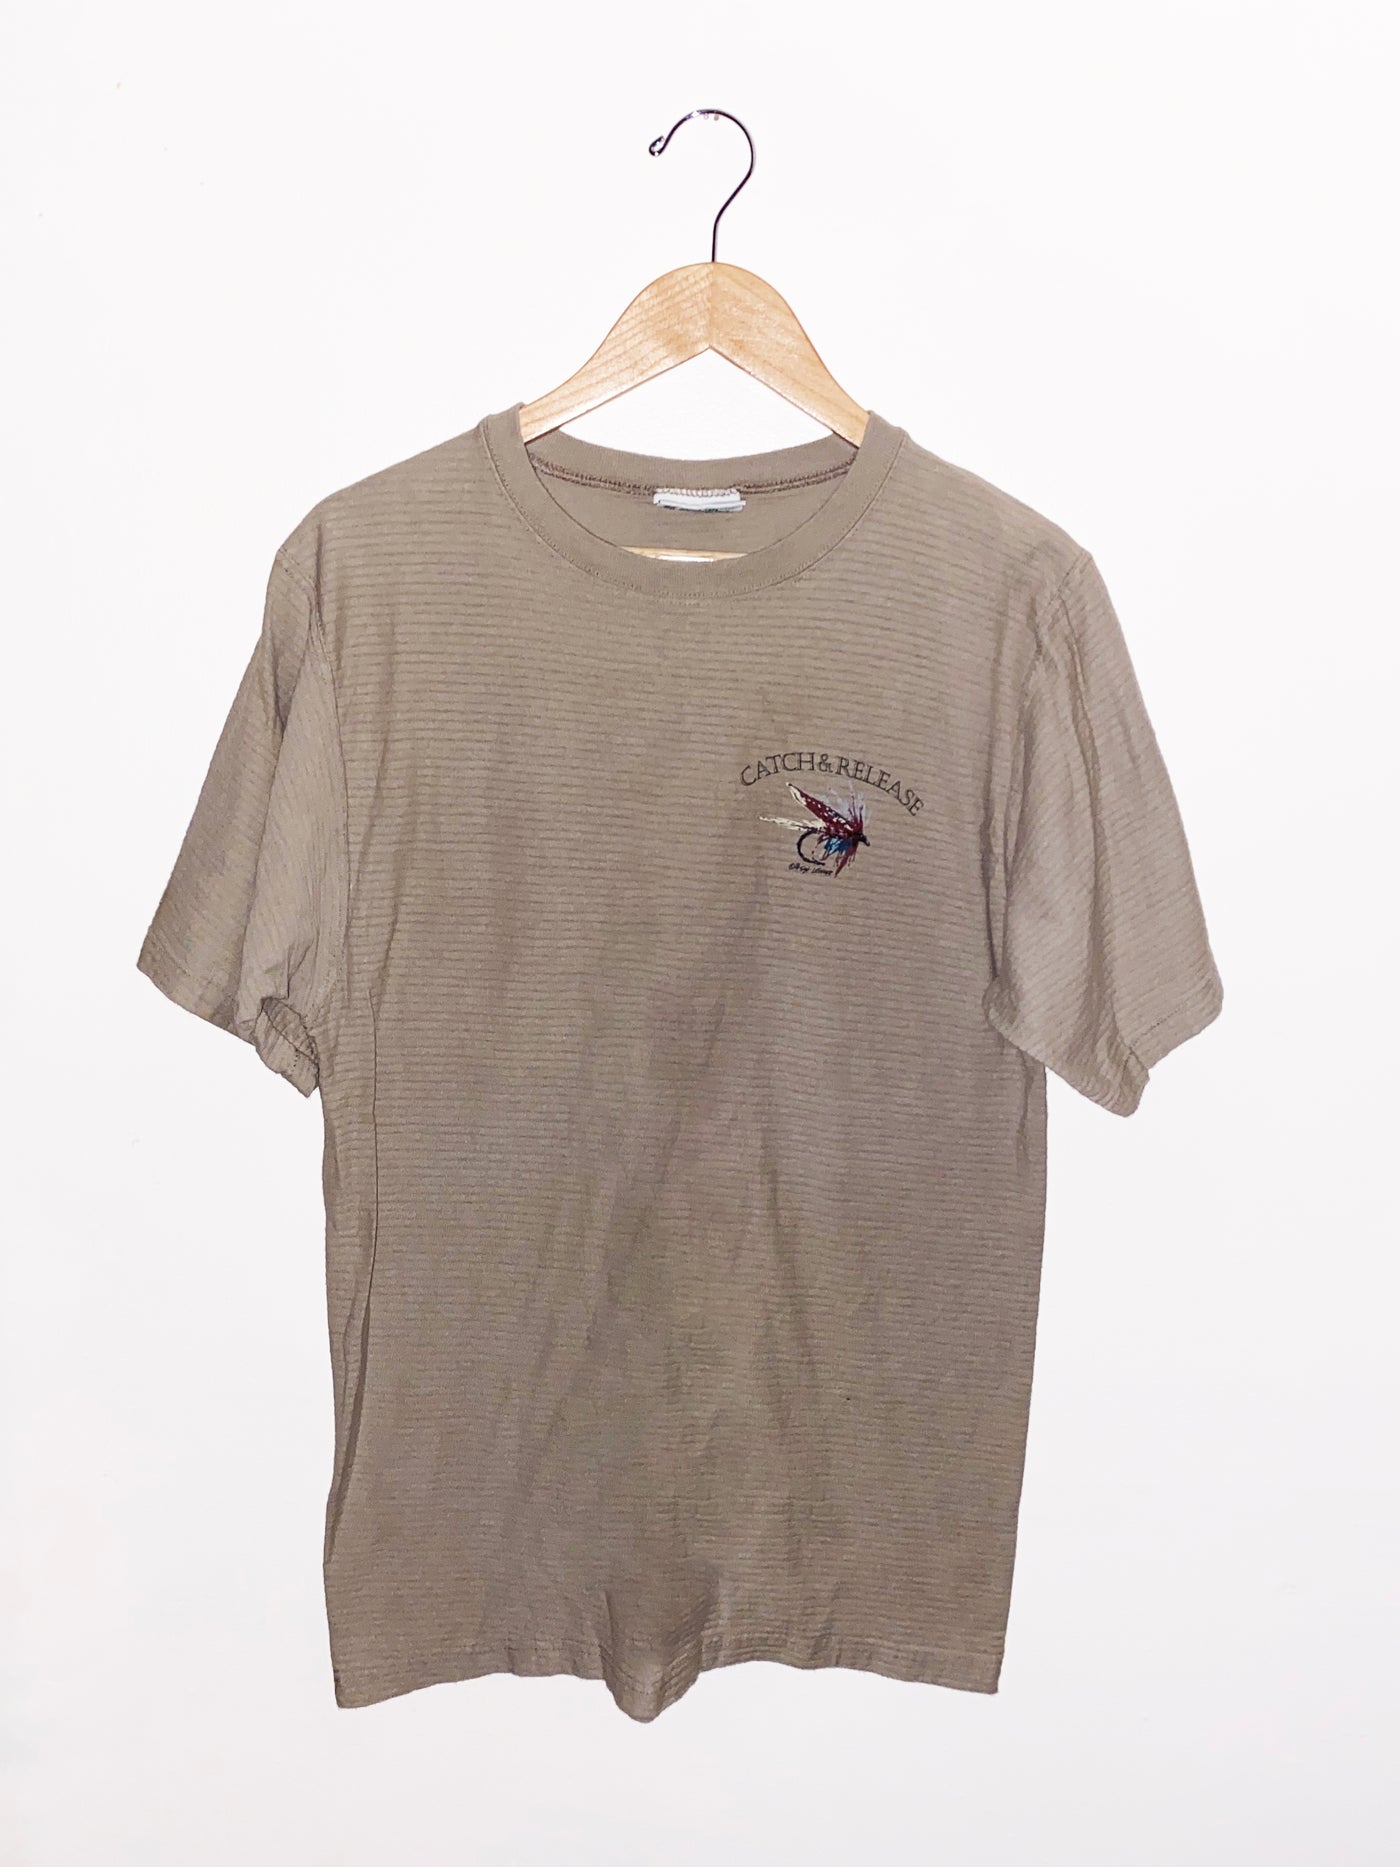 Vintage Catch and Release Fishing T-Shirt